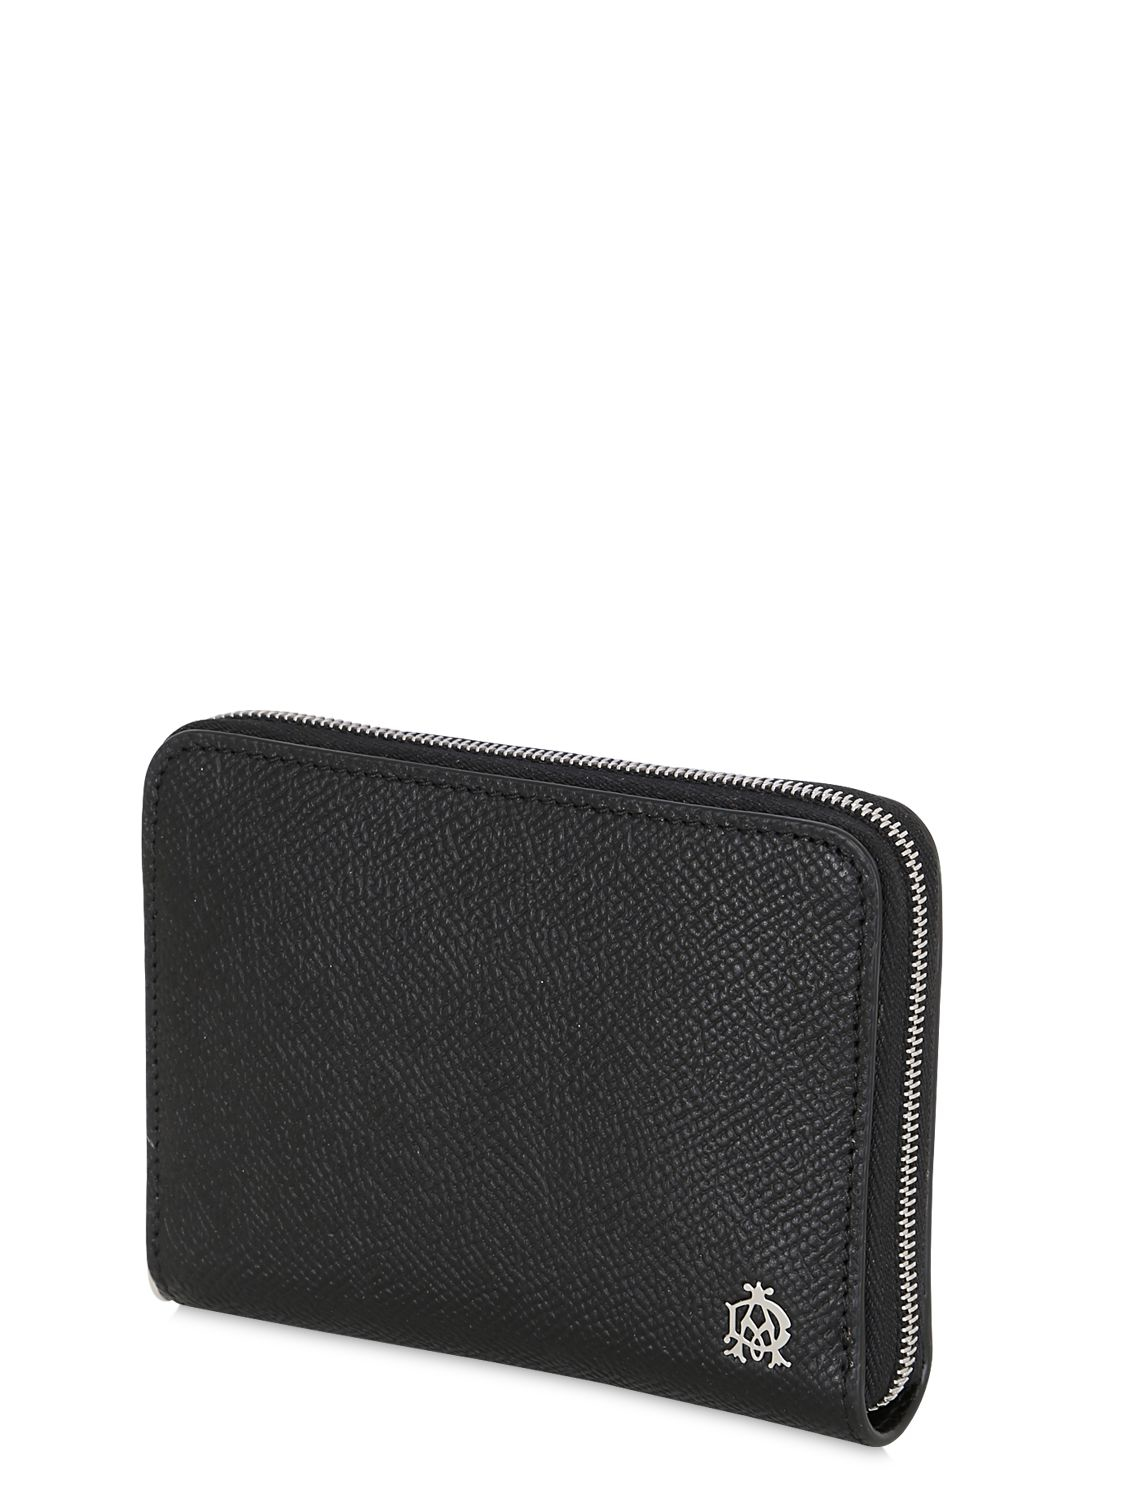 Lyst - Dunhill Small Leather Zip Around Wallet in Black for Men